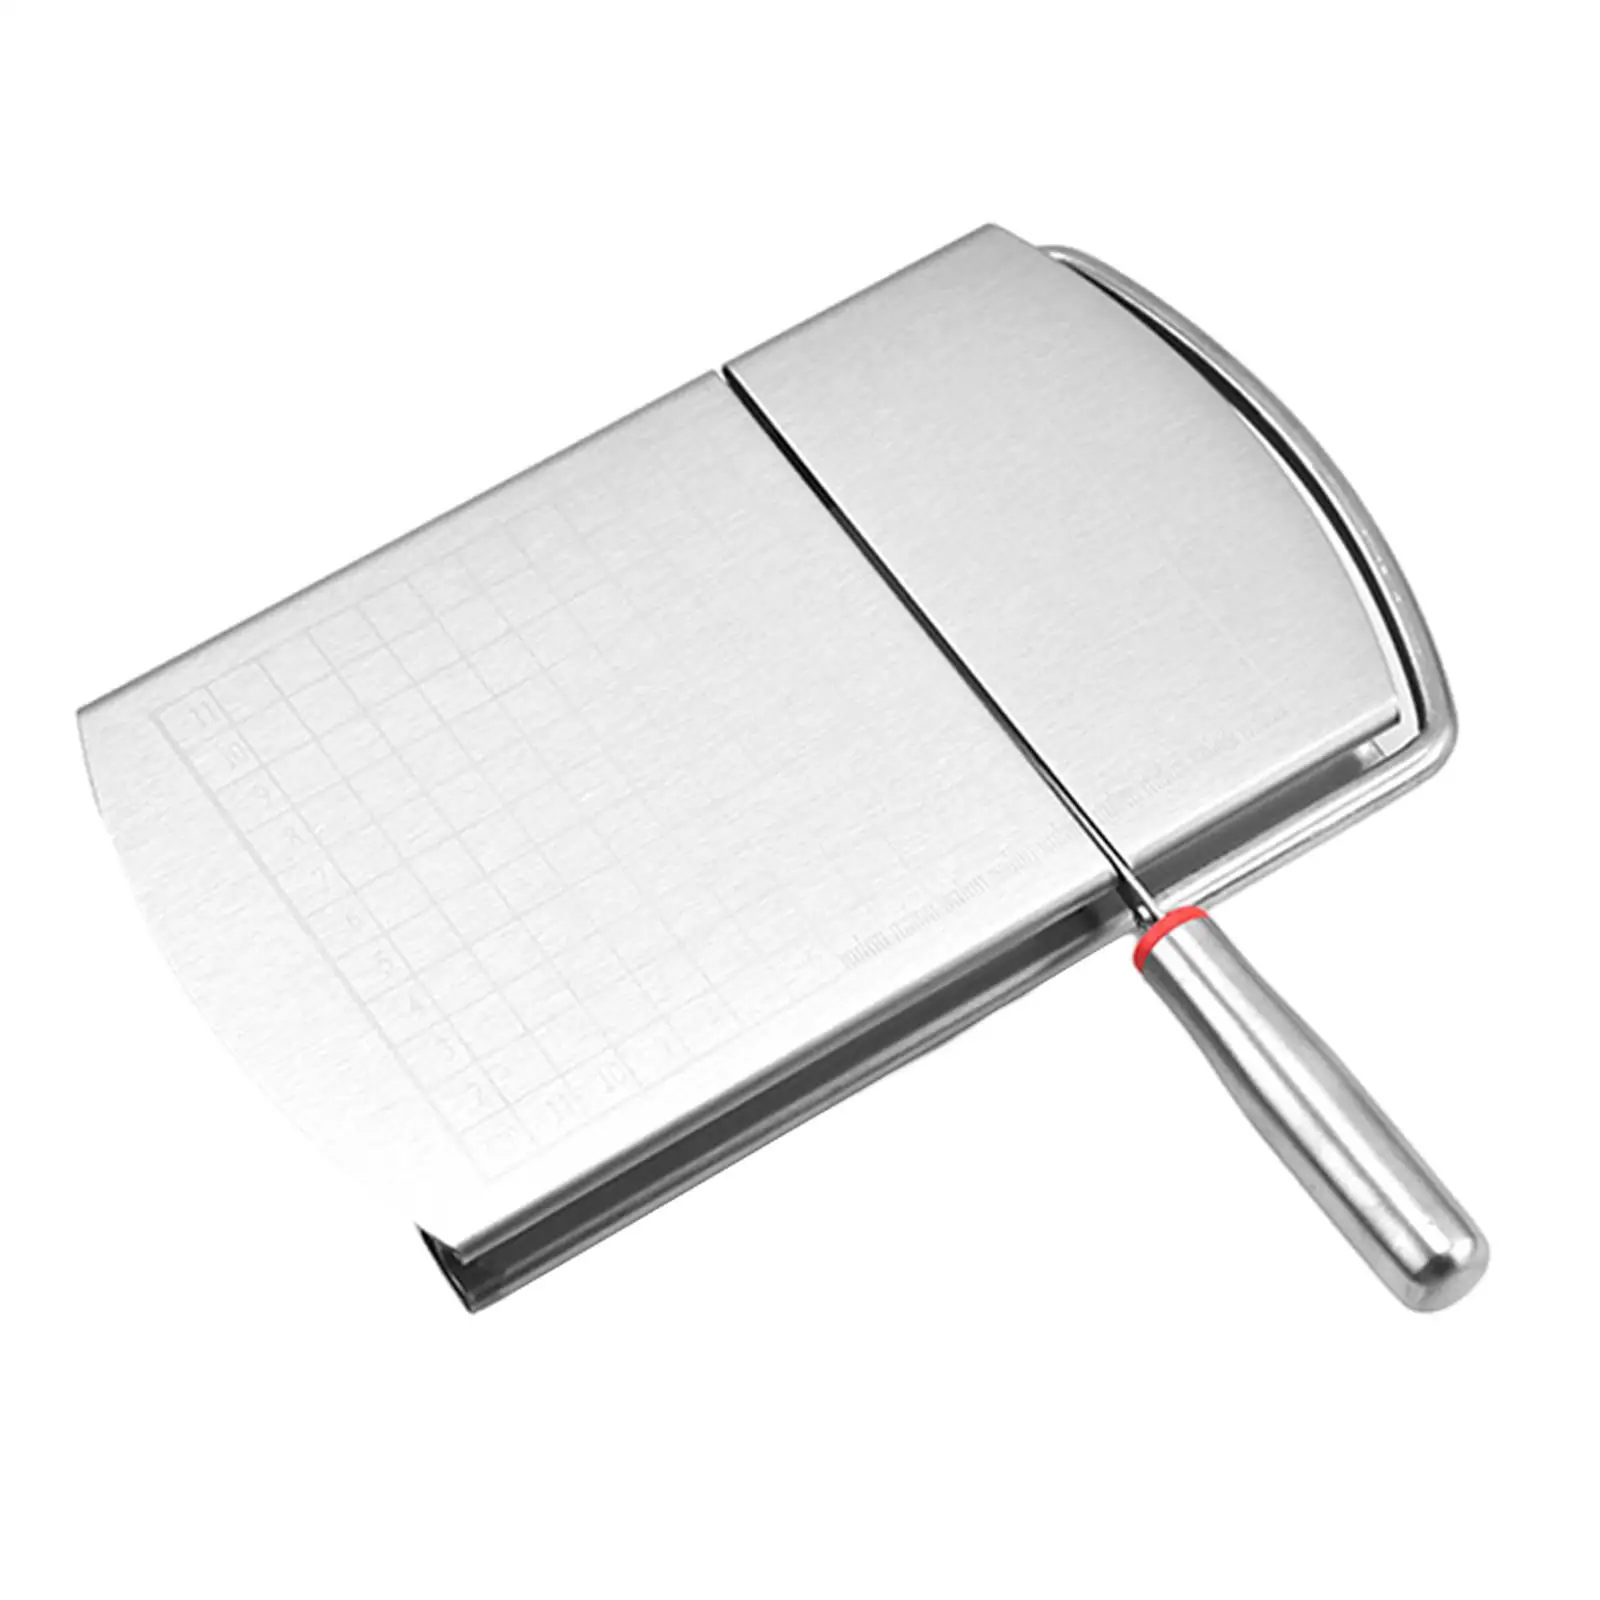 Cheese Slicer Professional Gift for Block Cheese for Restaurant Kitchen Home